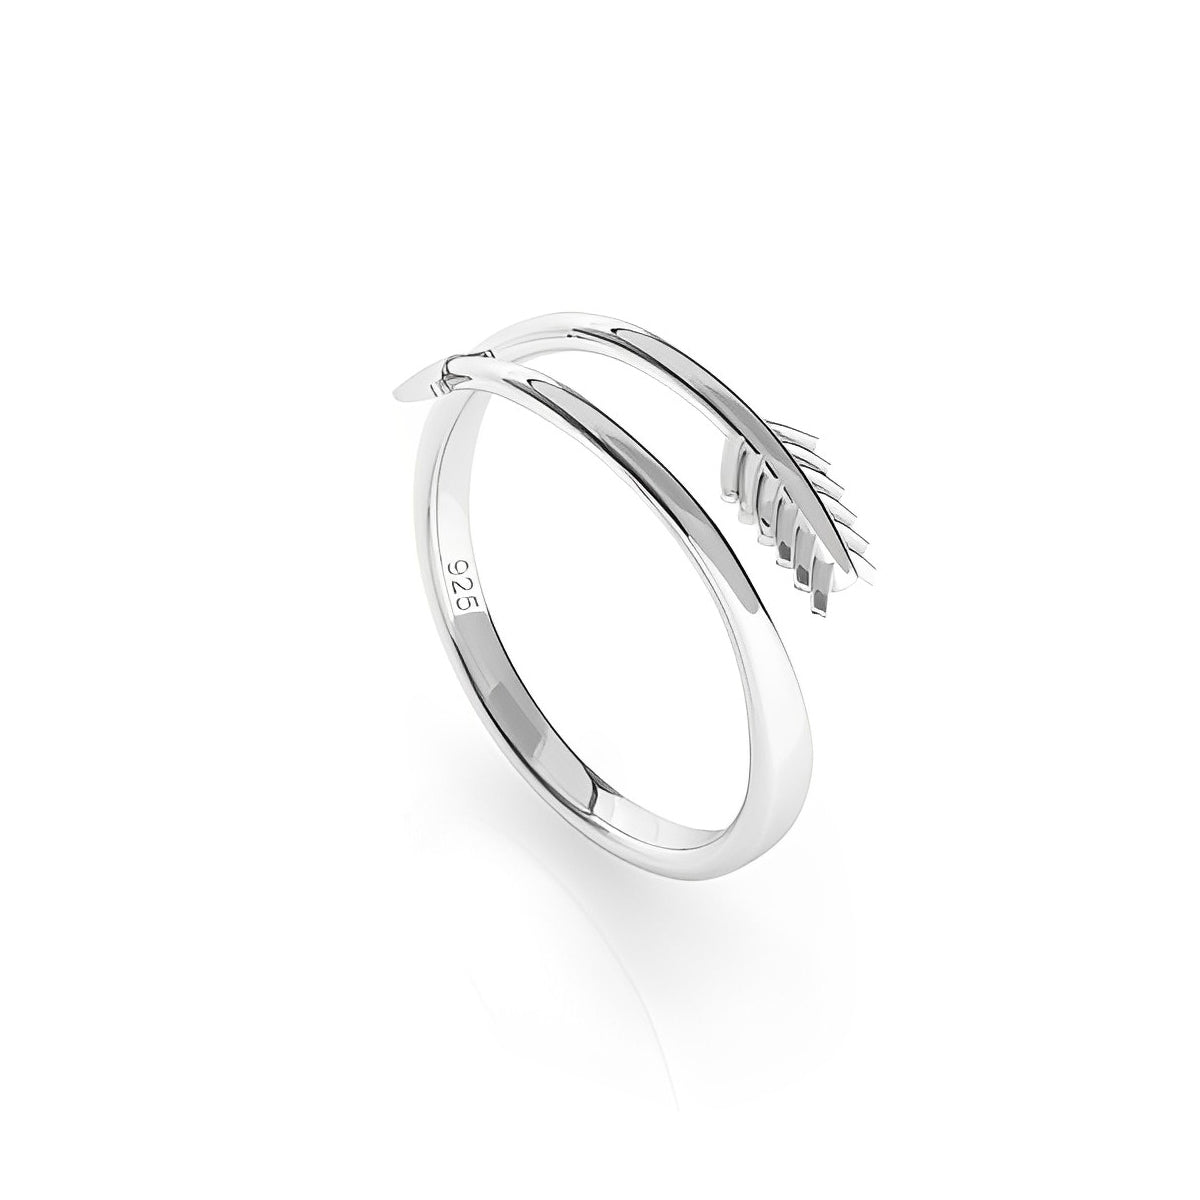 INEL ARGINT 925 ARROW rings > silver ring > arrow ring > gifts for her > gifts for girls > gifts for moms > gifts for best friend > birthday gift Maison la Stephanie   